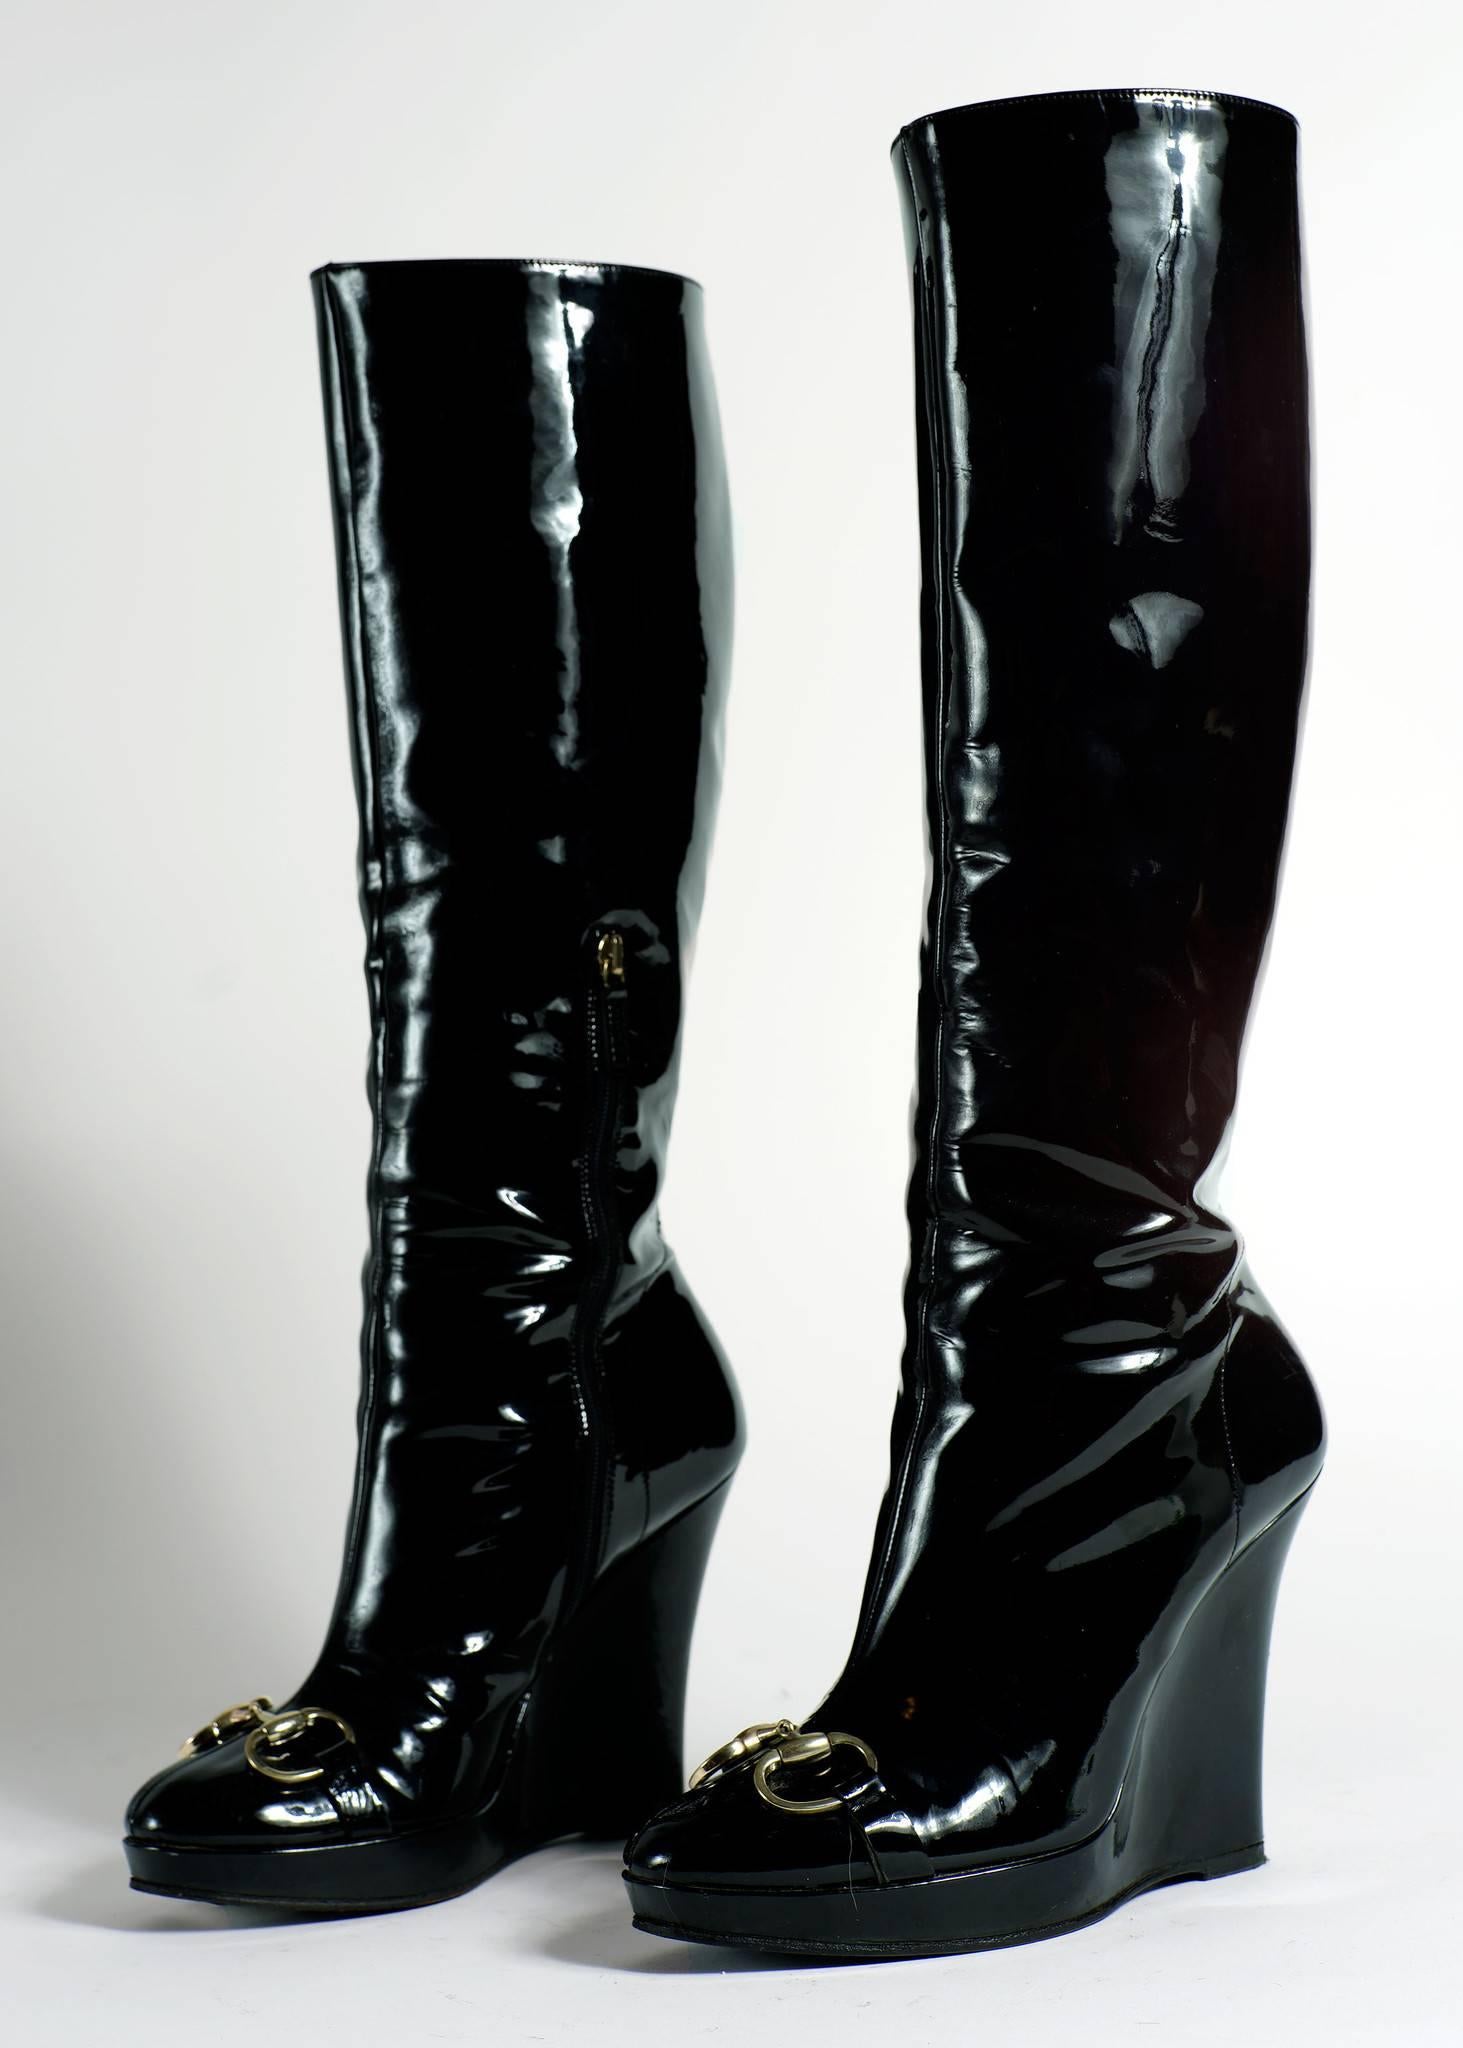 Black patent leather wedge heel boots with a gold horse bit detail by Gucci.

Color: Black 
Size Marked:  7 1/2B, 14 inches from heel and covers calf, Wedge is 4 inches 
Shipping Weight: 5lbs  

Good Vintage Condition: Please remember all clothes